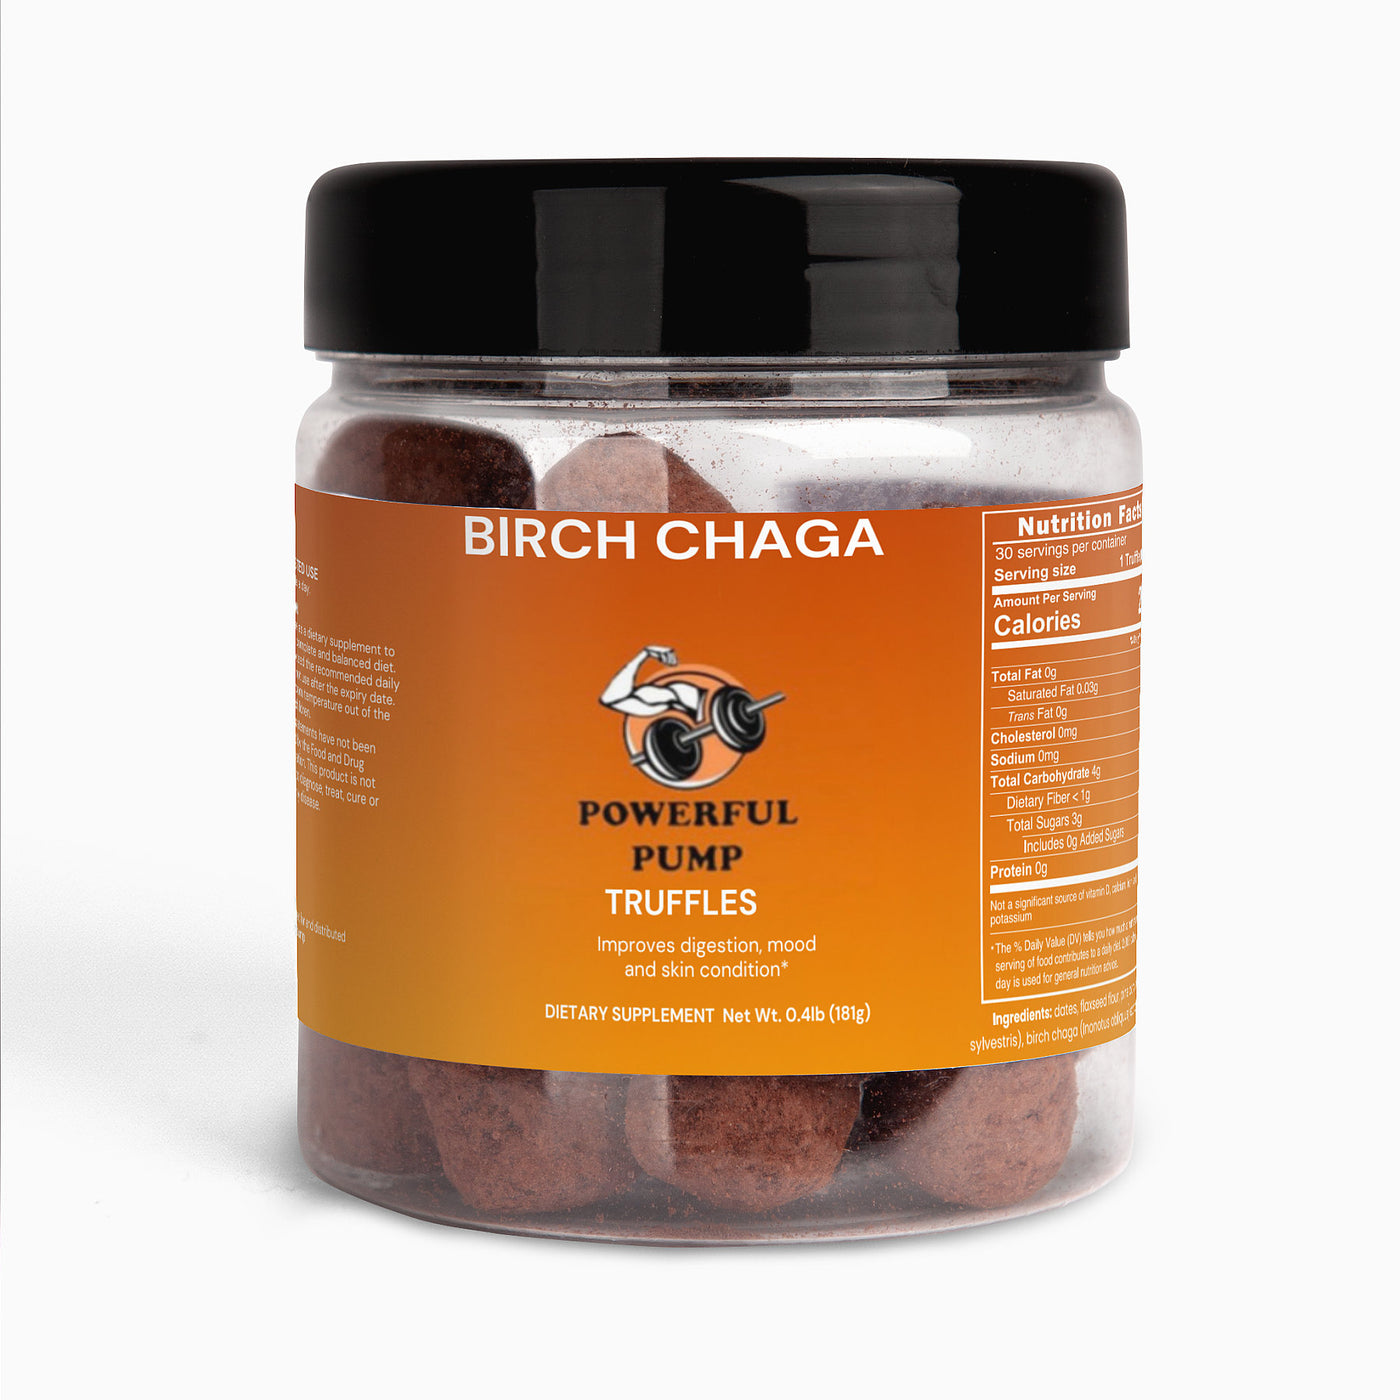 Birch Chaga Truffles - Indulge in the rich flavors and natural benefits of birch and chaga for a unique, healthful treat.